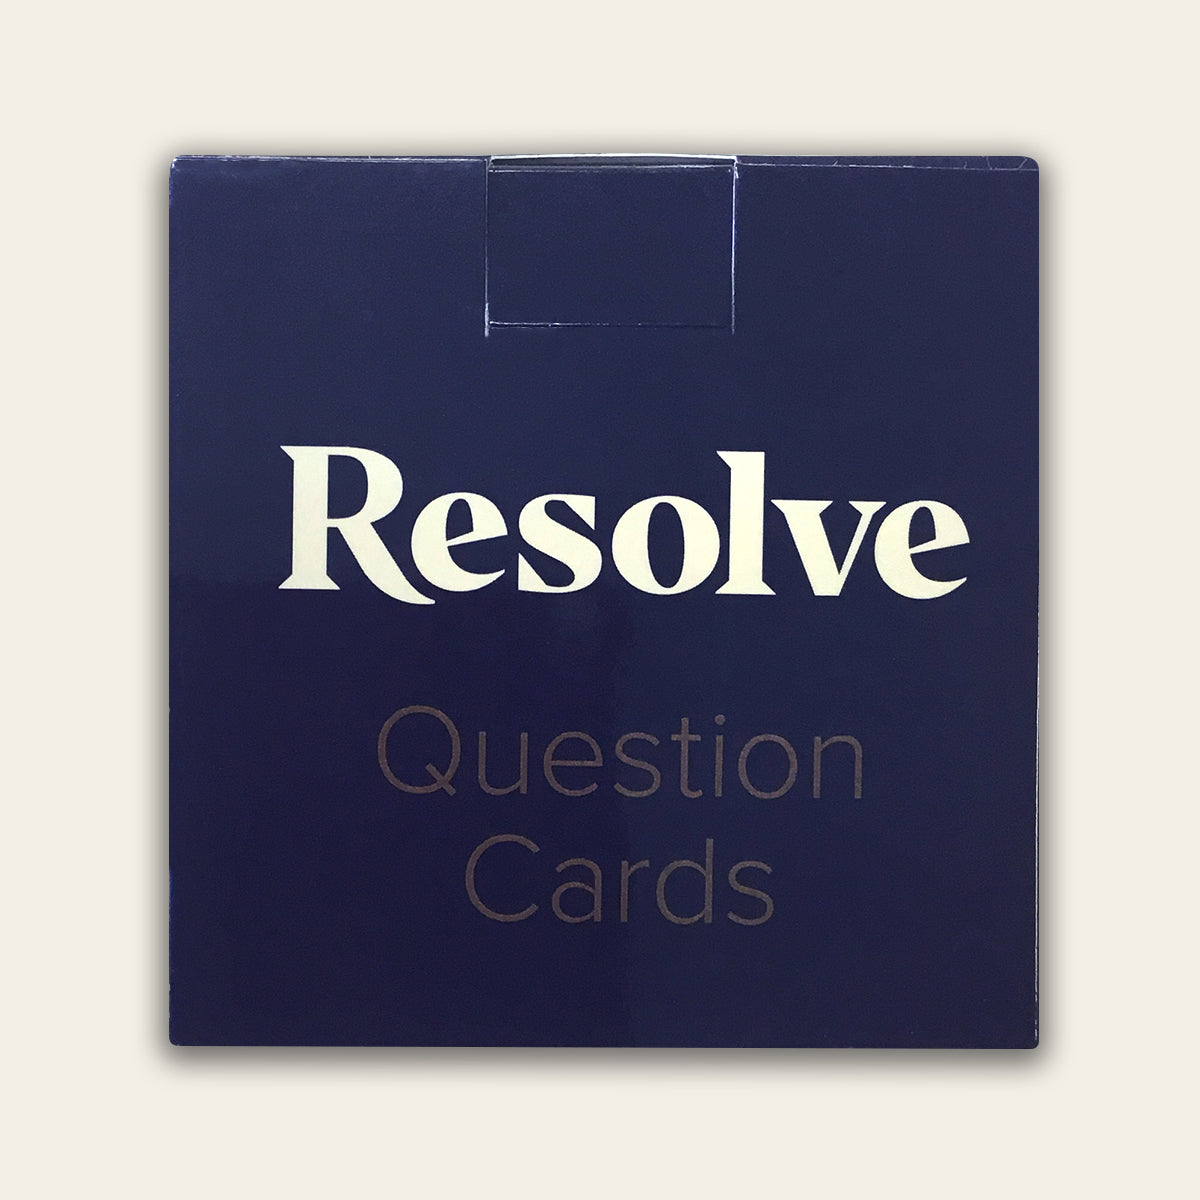 Resolve Question Cards